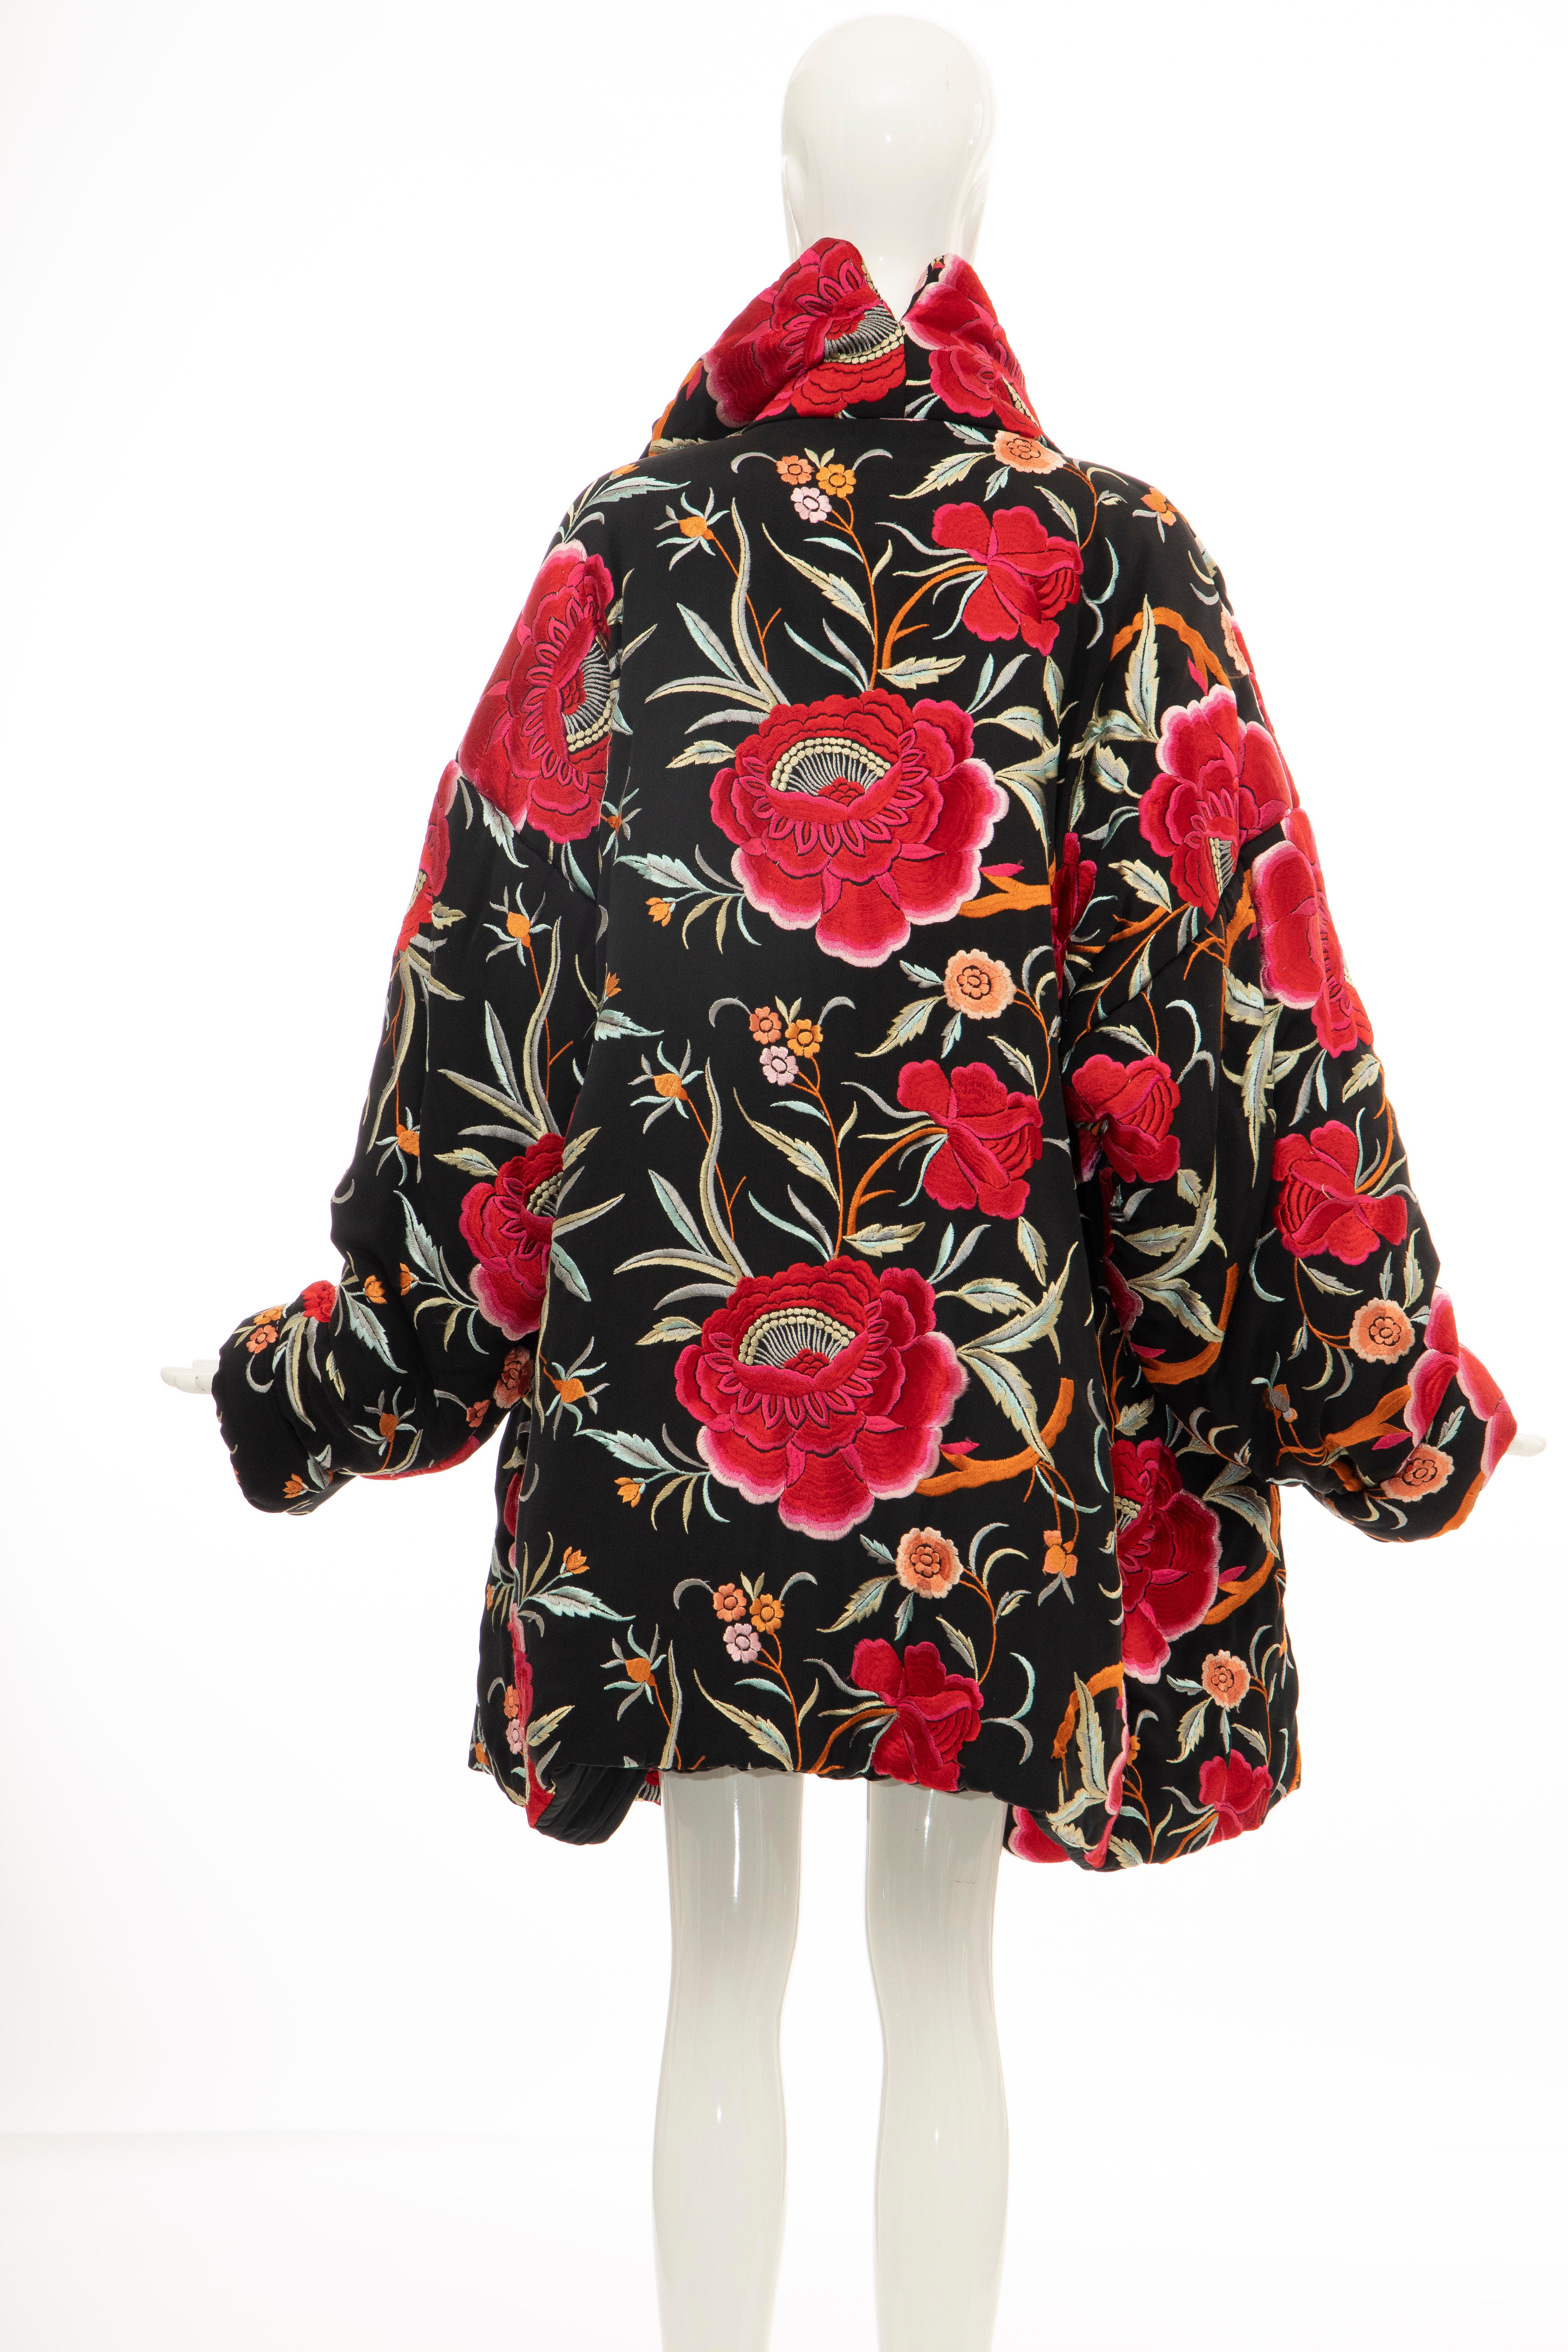 Norma Kamali Black Floral Embroidered Cocoon Coat, Circa: 1980's 3